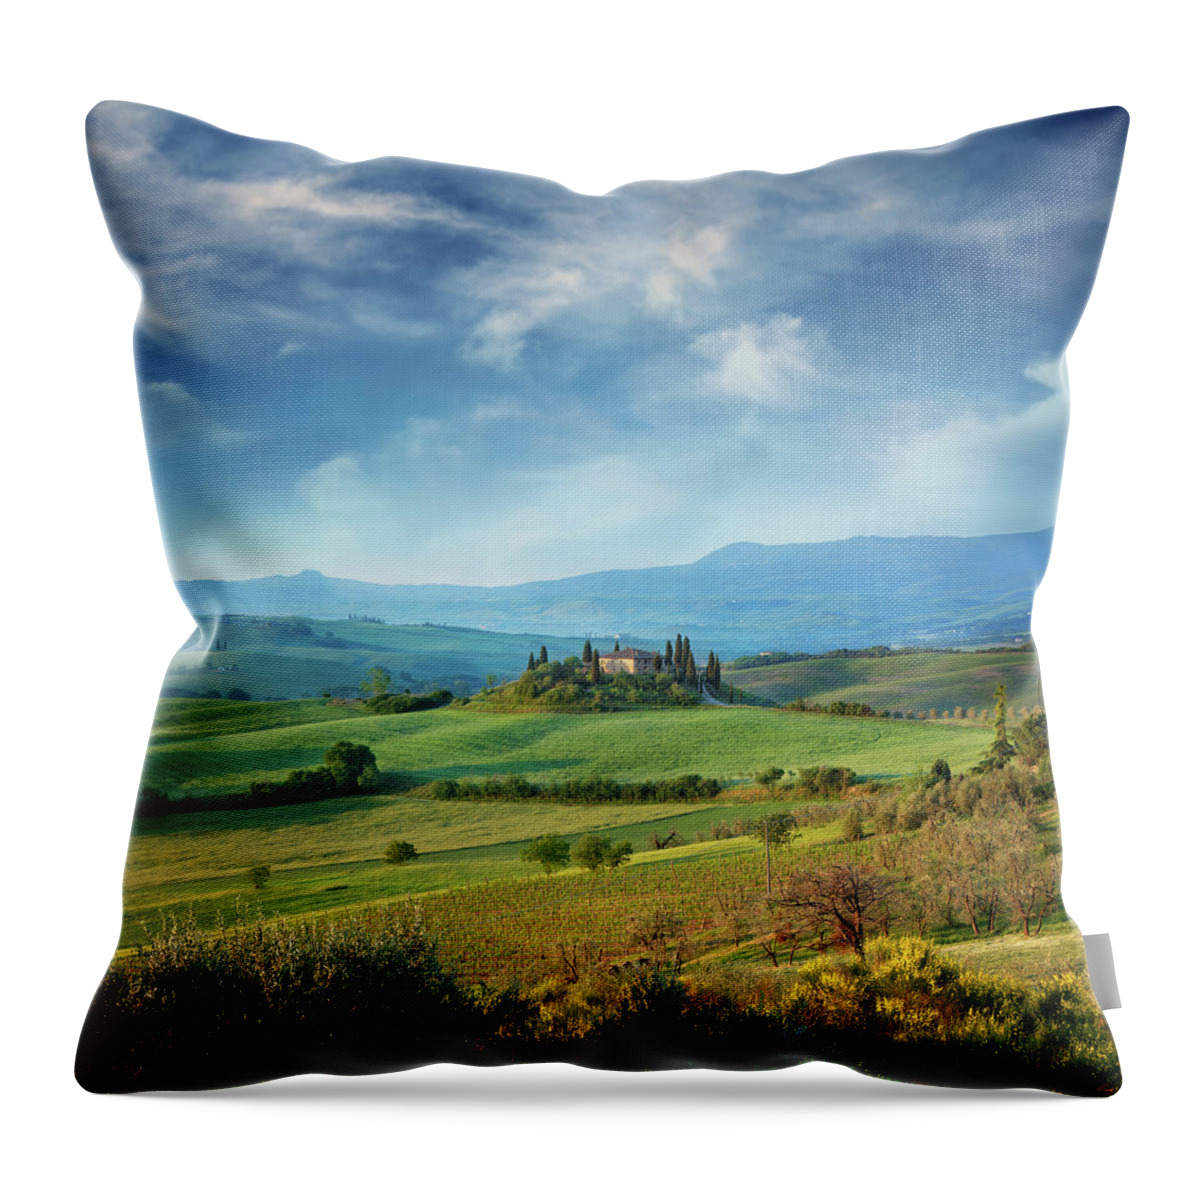 Scenics Throw Pillow featuring the photograph Farm In Tuscany #5 by Mammuth